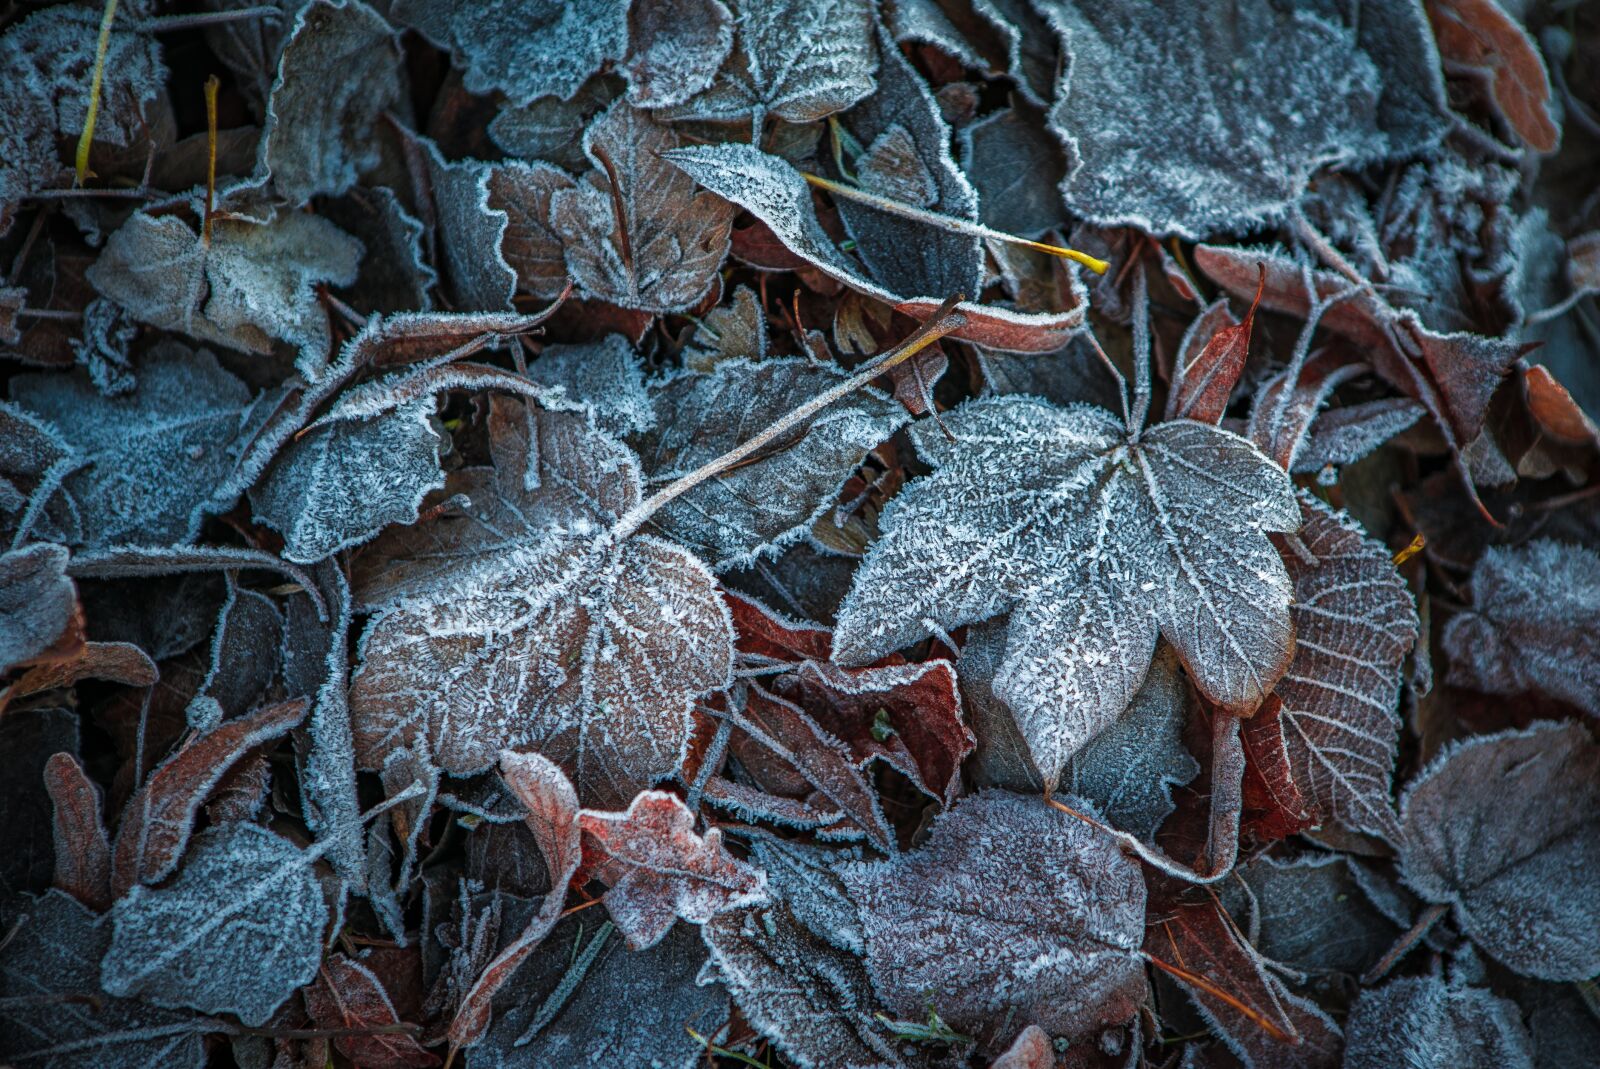 Sony DT 50mm F1.8 SAM sample photo. Leaves, winter, frost photography